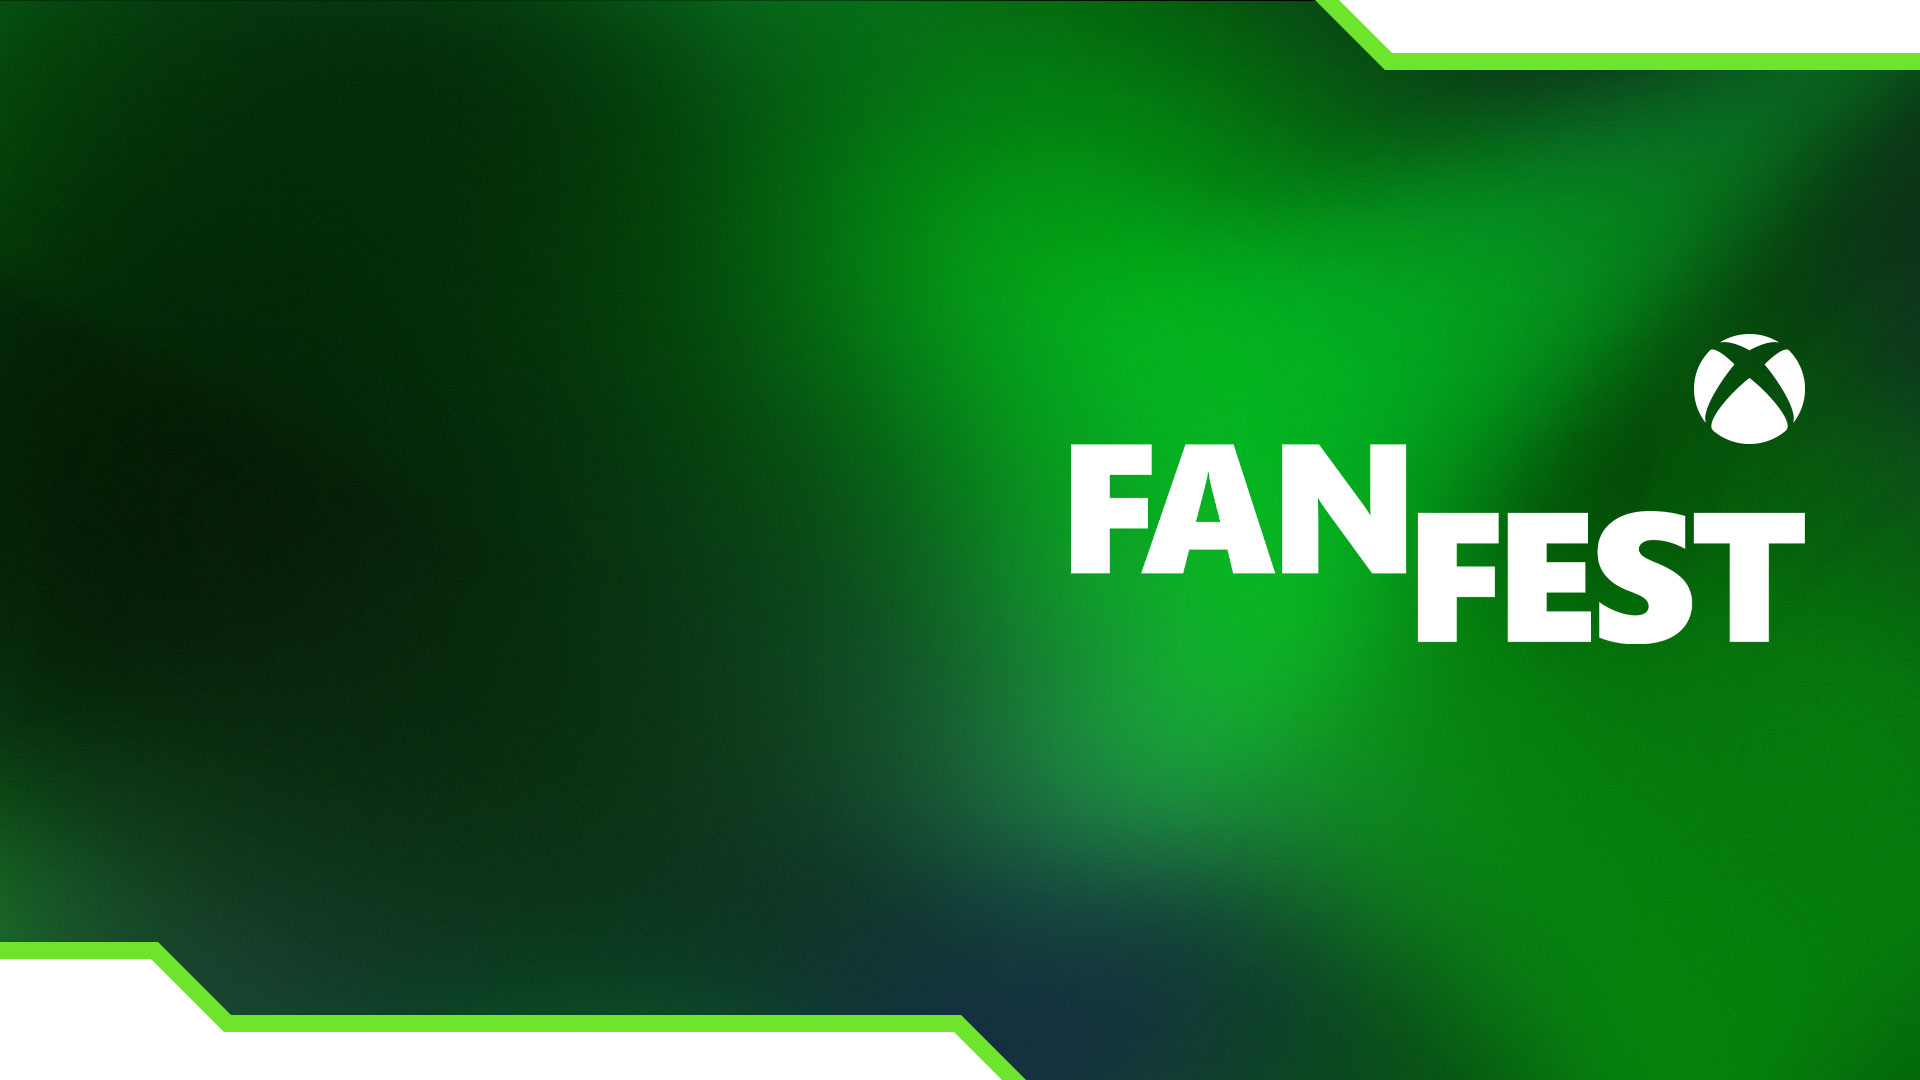 Xbox Sphere, FanFest with green gradients.